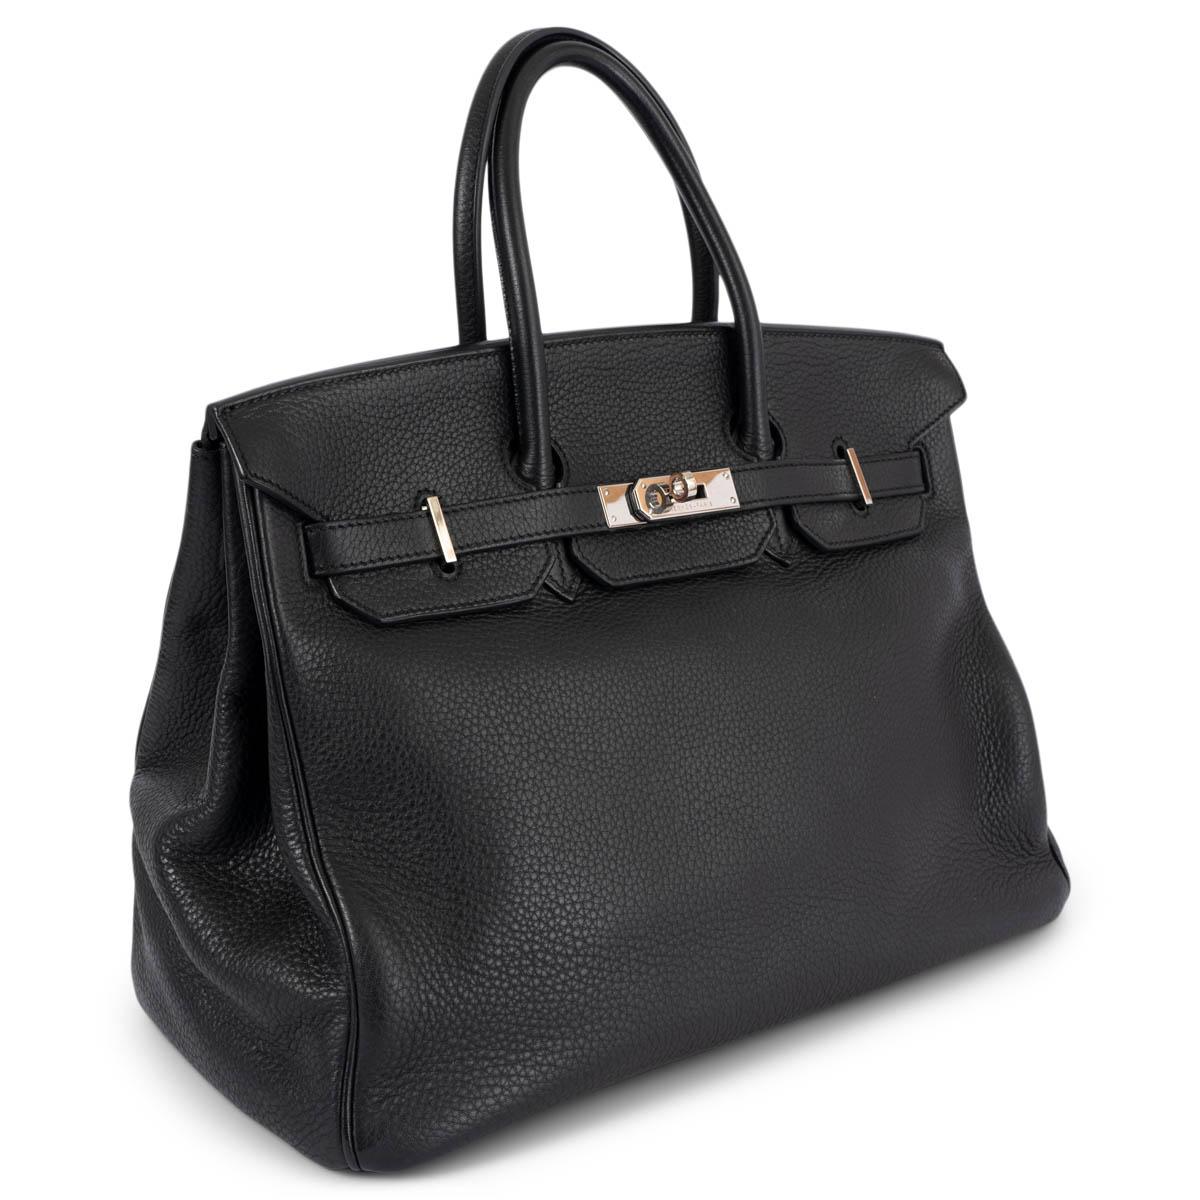 100% authentic Hermès Birkin 35 bag in black Taurillon Clemence leather with palladium hardware. Lined in Chevre (goat skin) with an open pocket against the front and a zipper pocket against the back. Has been carried and shows some scratches to the